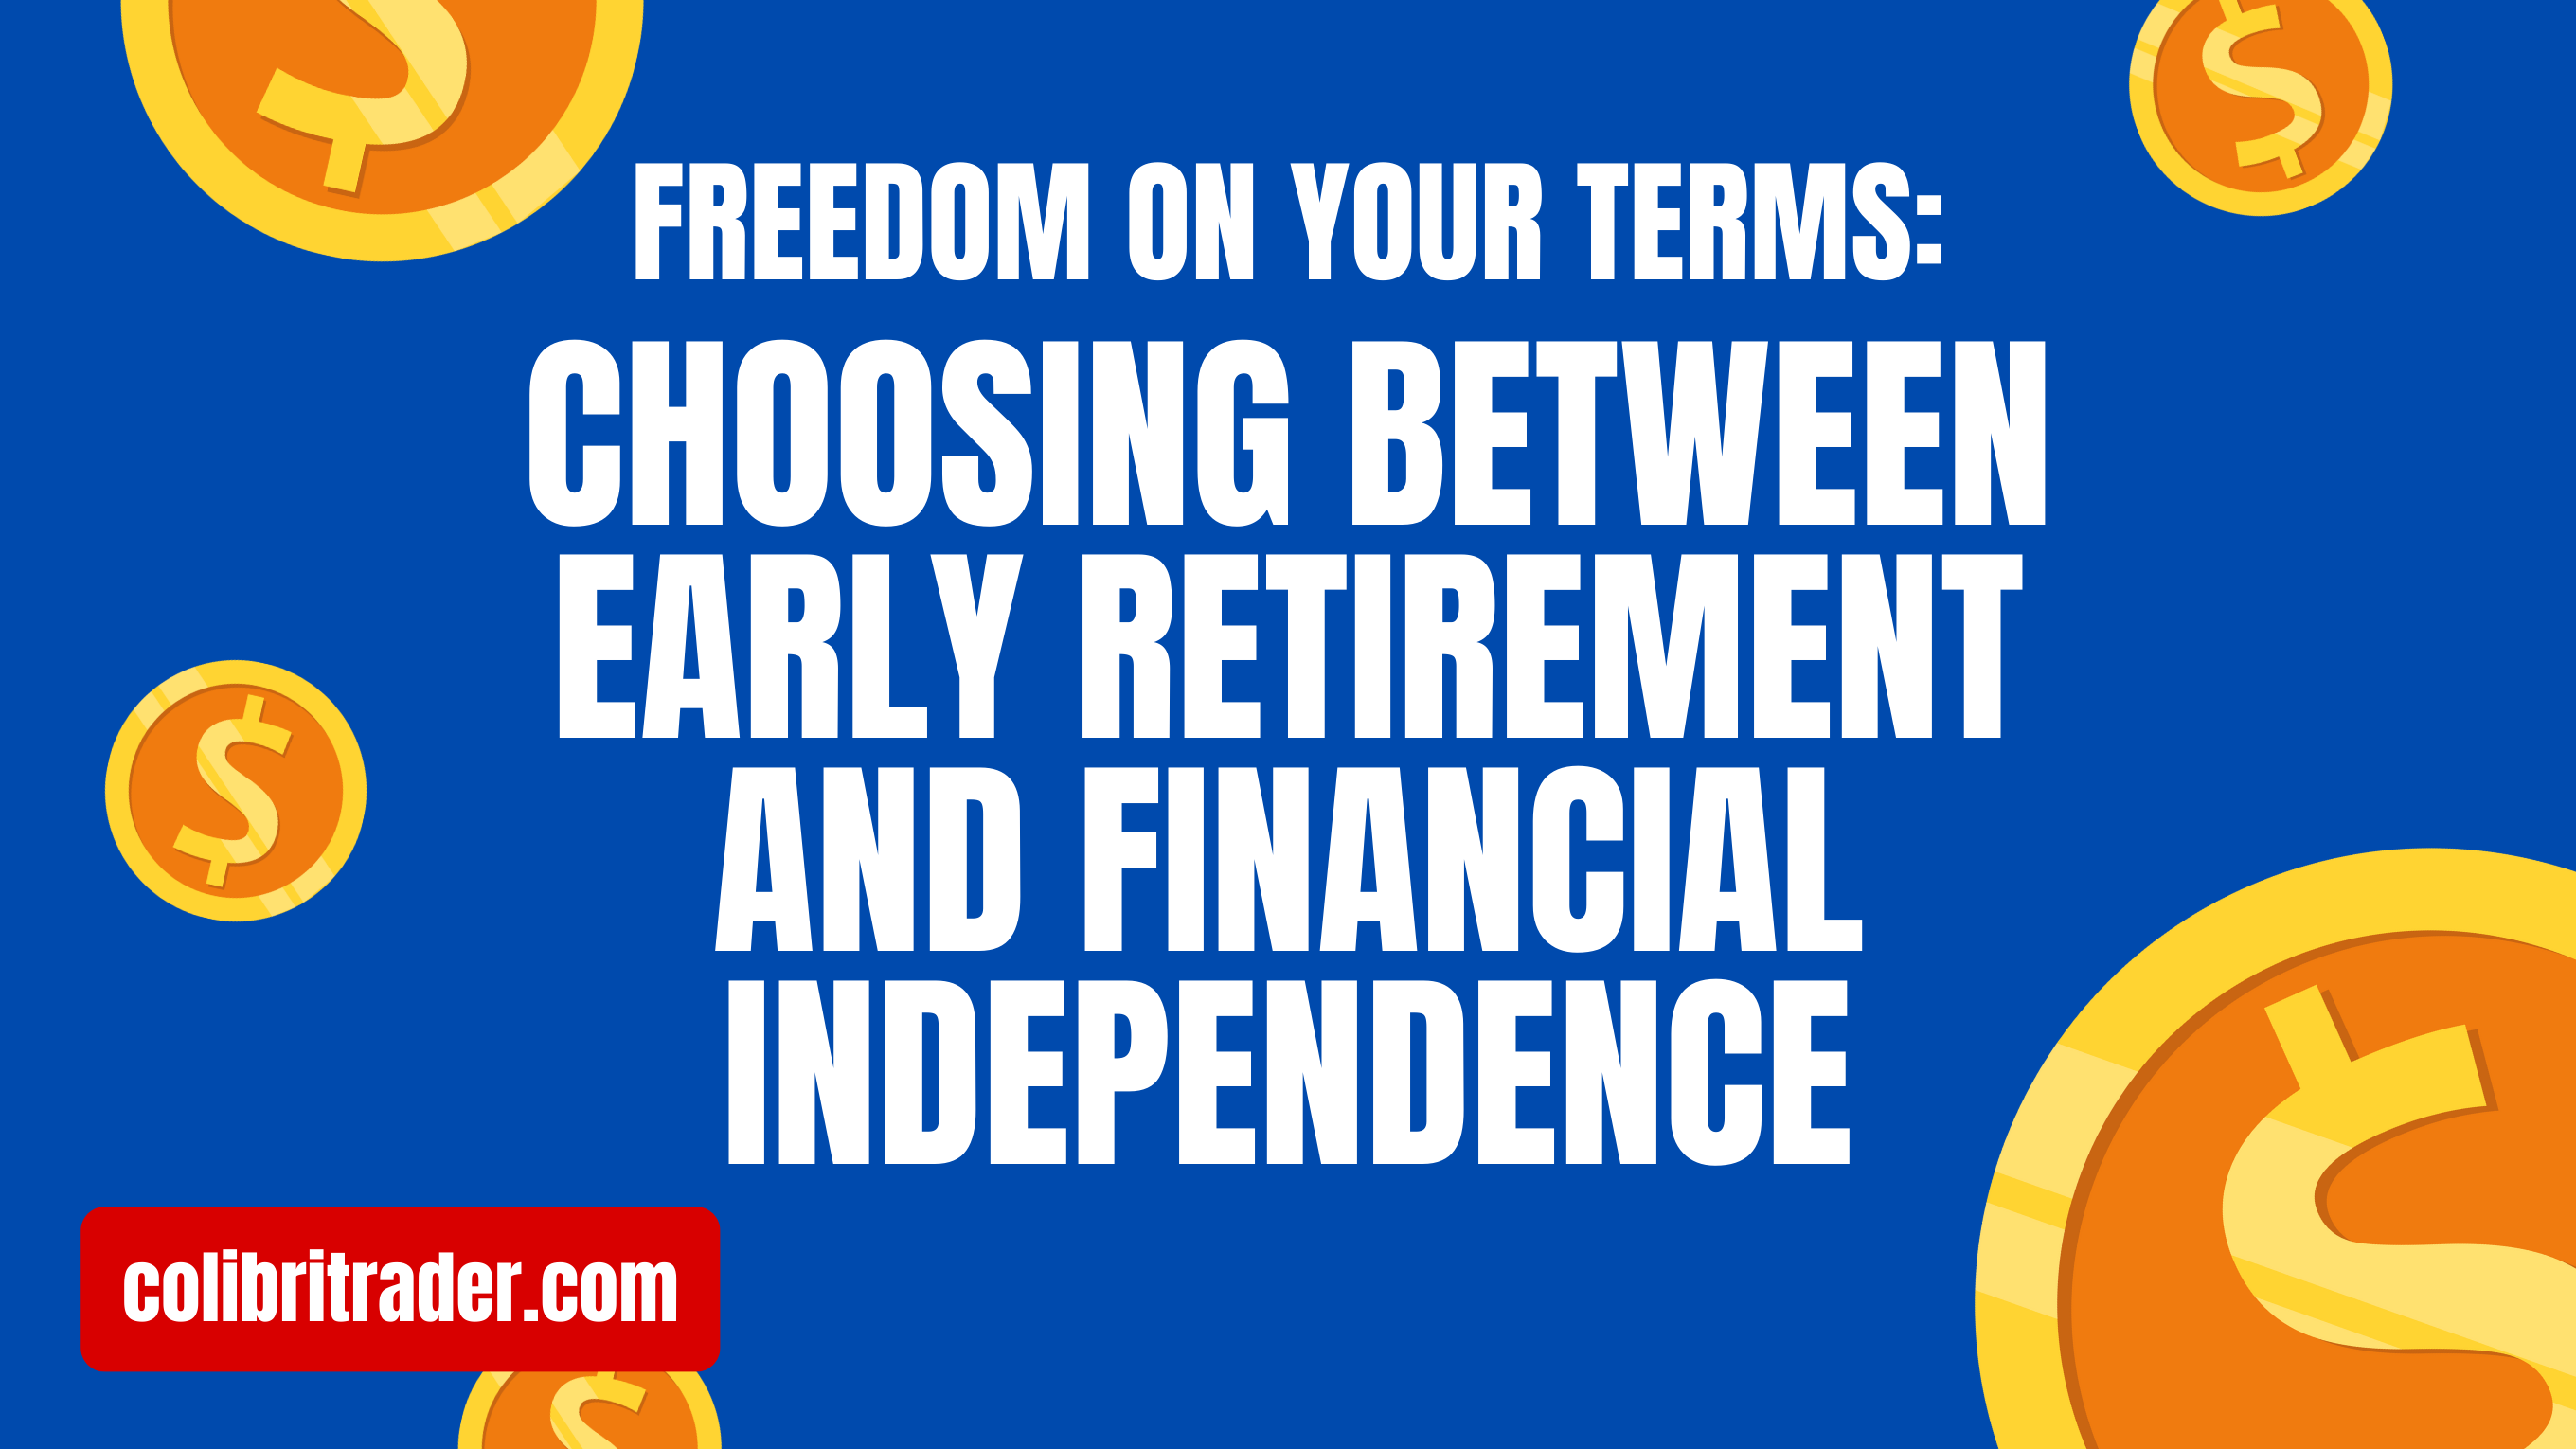 Freedom on Your Terms: Choosing Between Early Retirement and Financial Independence